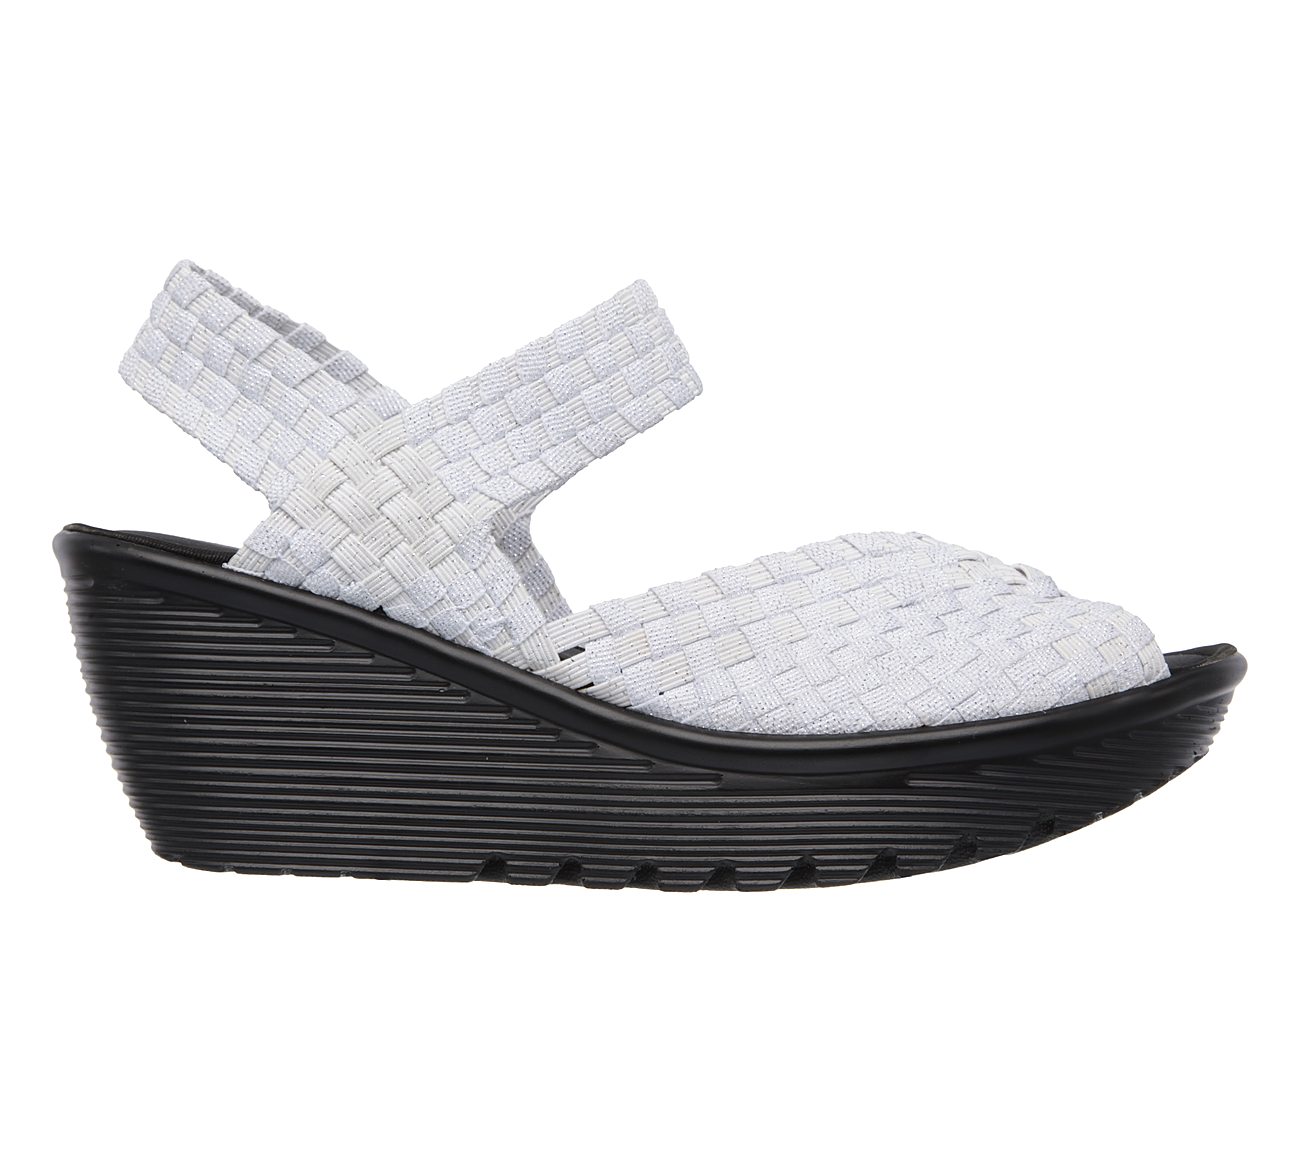 skechers stretch weave sandals off 66 